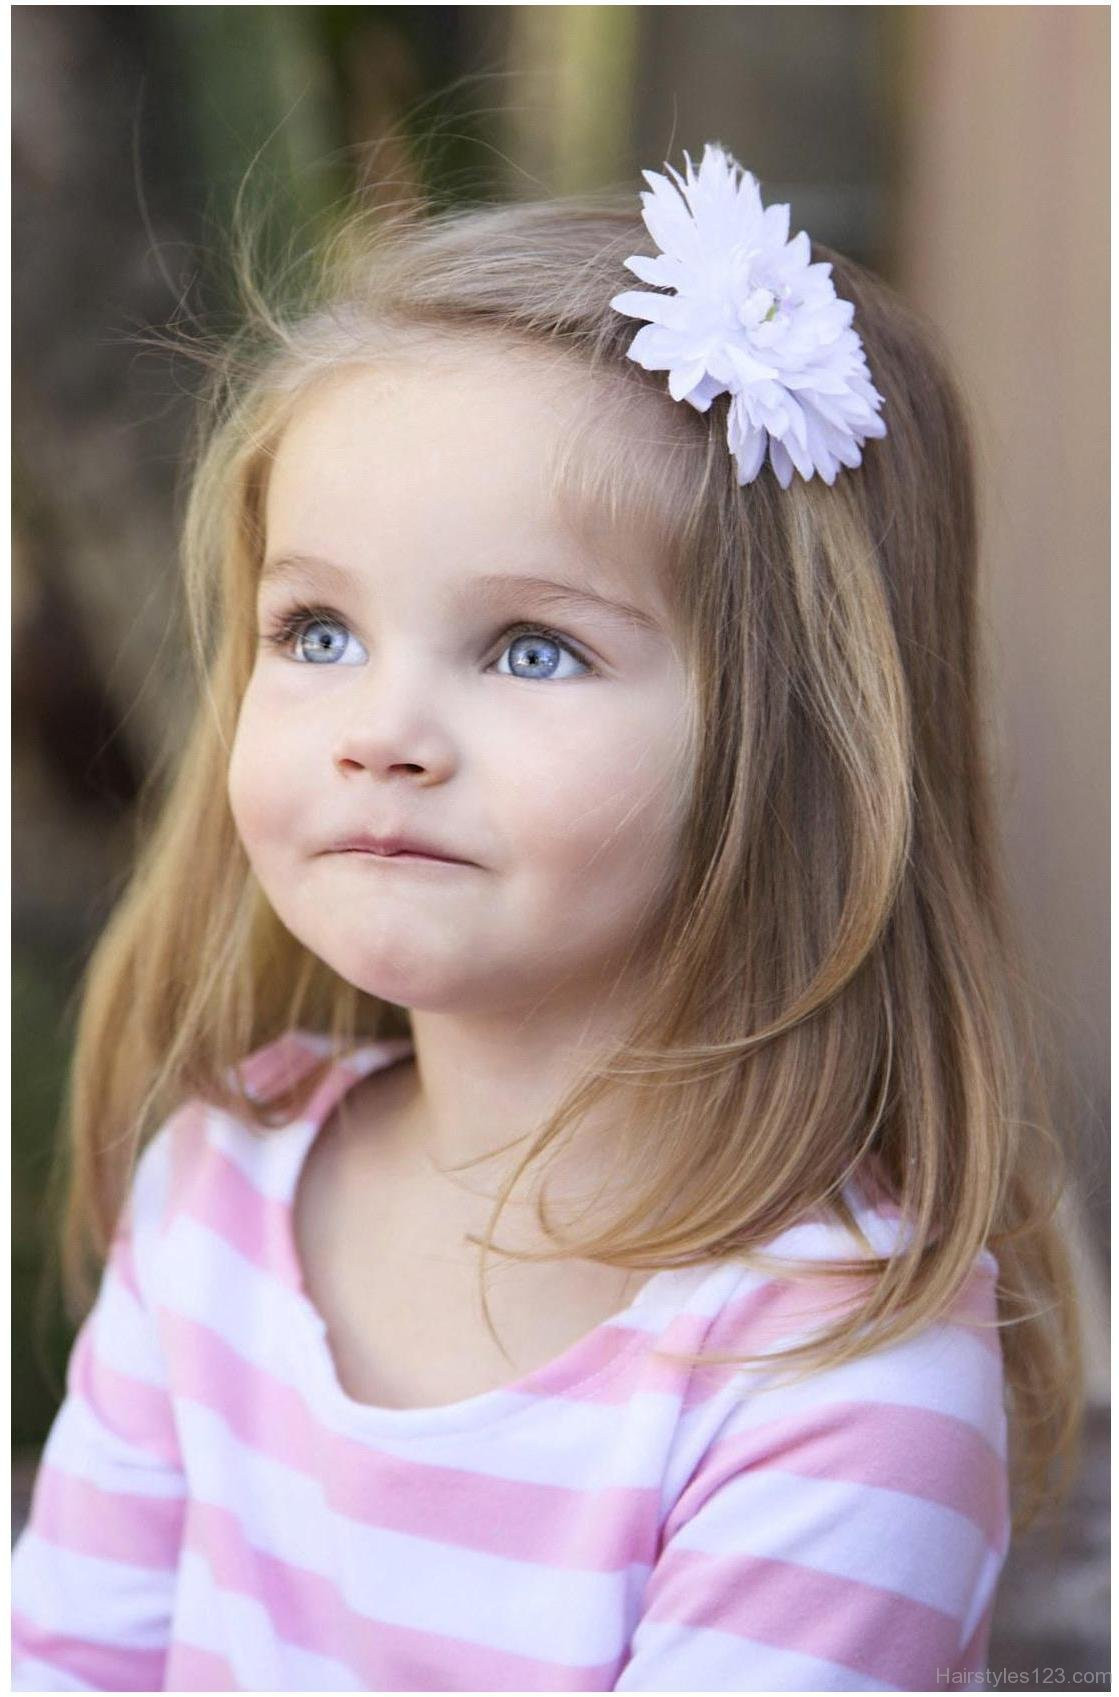 Kids With White Hair
 1001 Ideas for Adorable Hairstyles for Little Girls